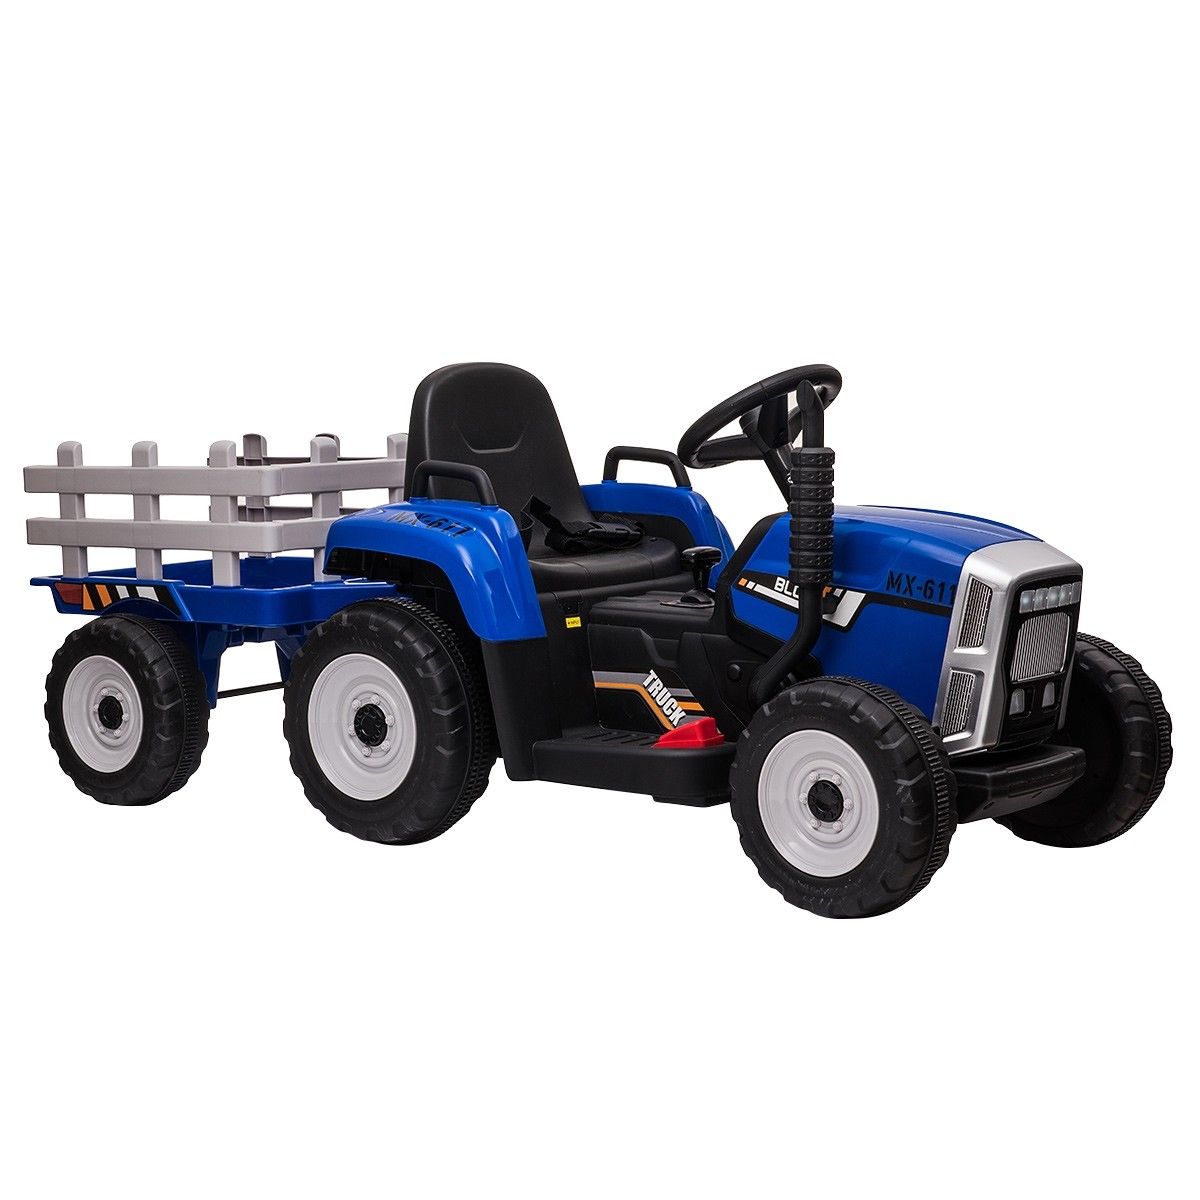 Kids Farm Tractor Electric Ride On Toys 2.4G R/C Remote Control Cars w ...